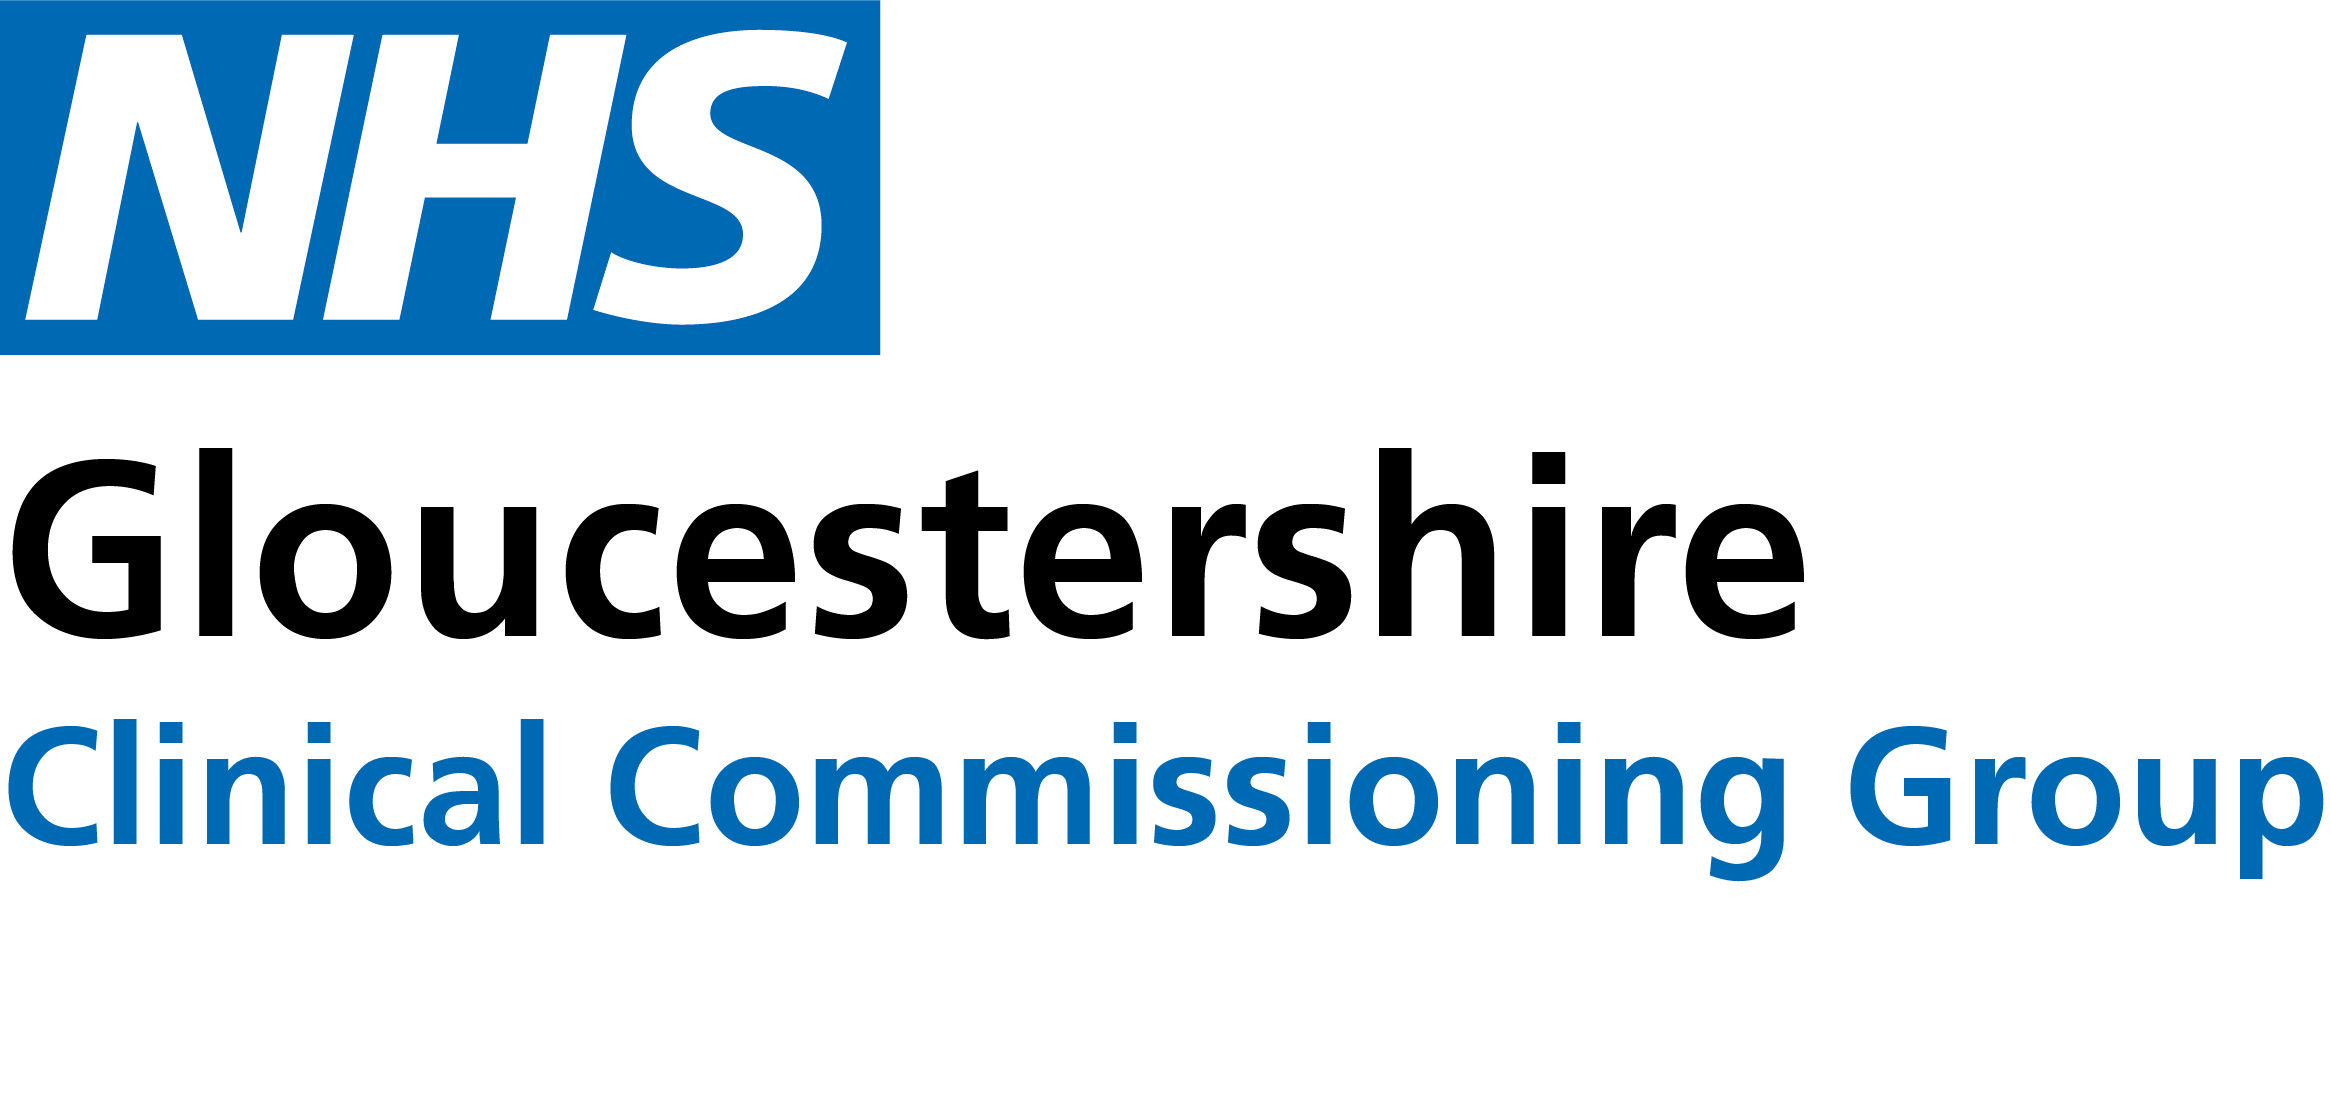 NHS Gloucestershire Clinical Commissioning Group logi